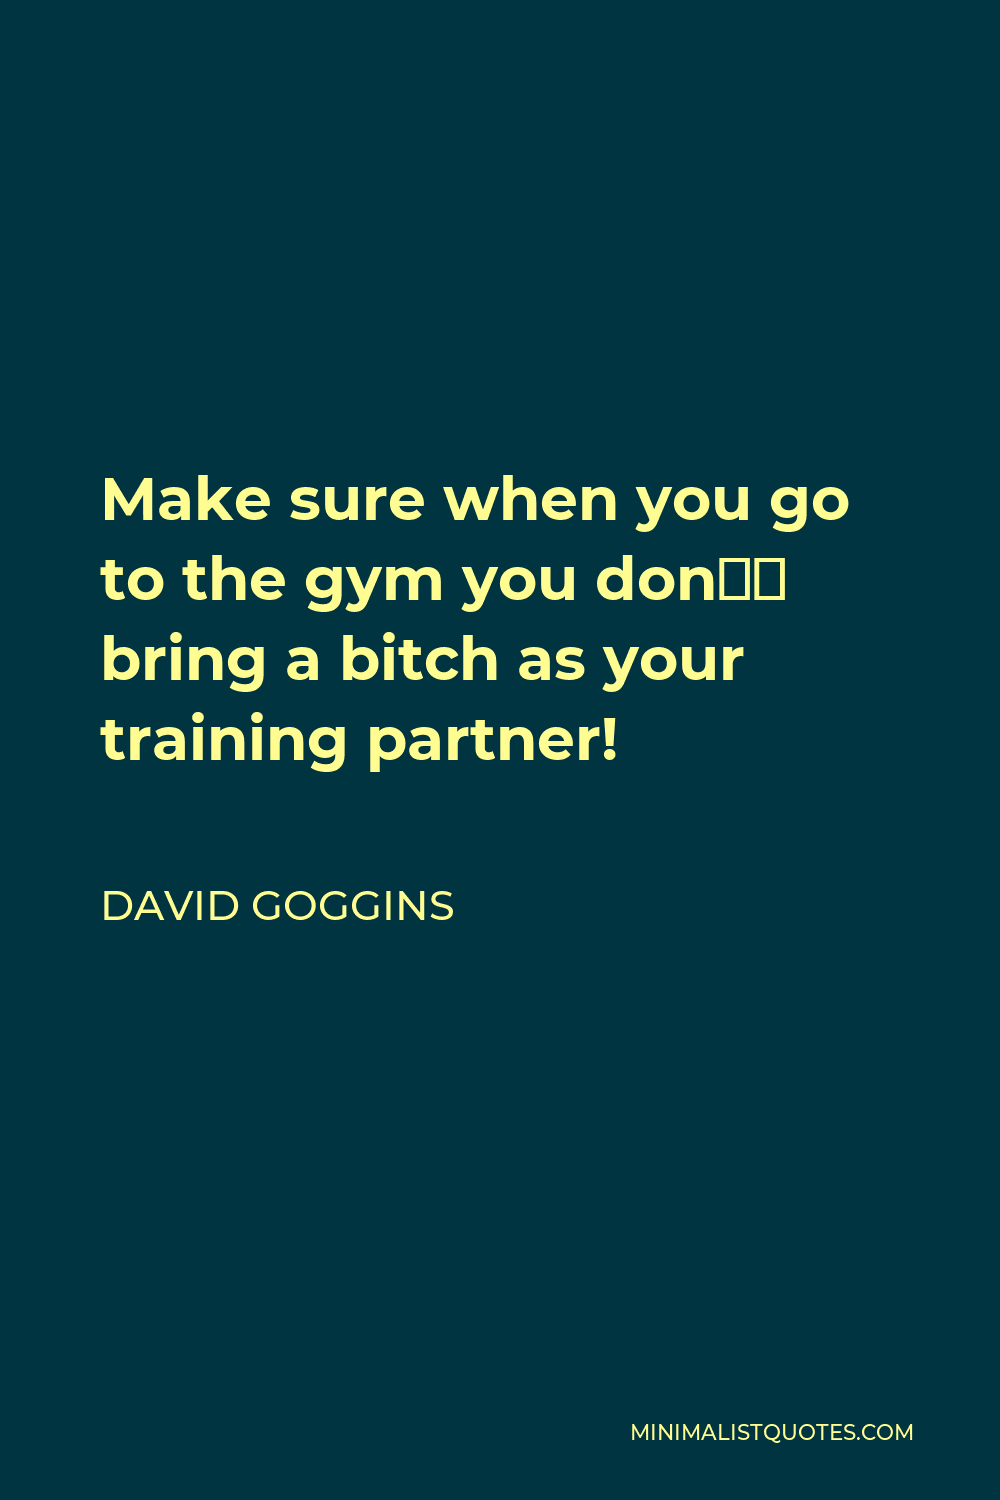 David Goggins Quote - Make sure when you go to the gym you don’t bring a bitch as your training partner!